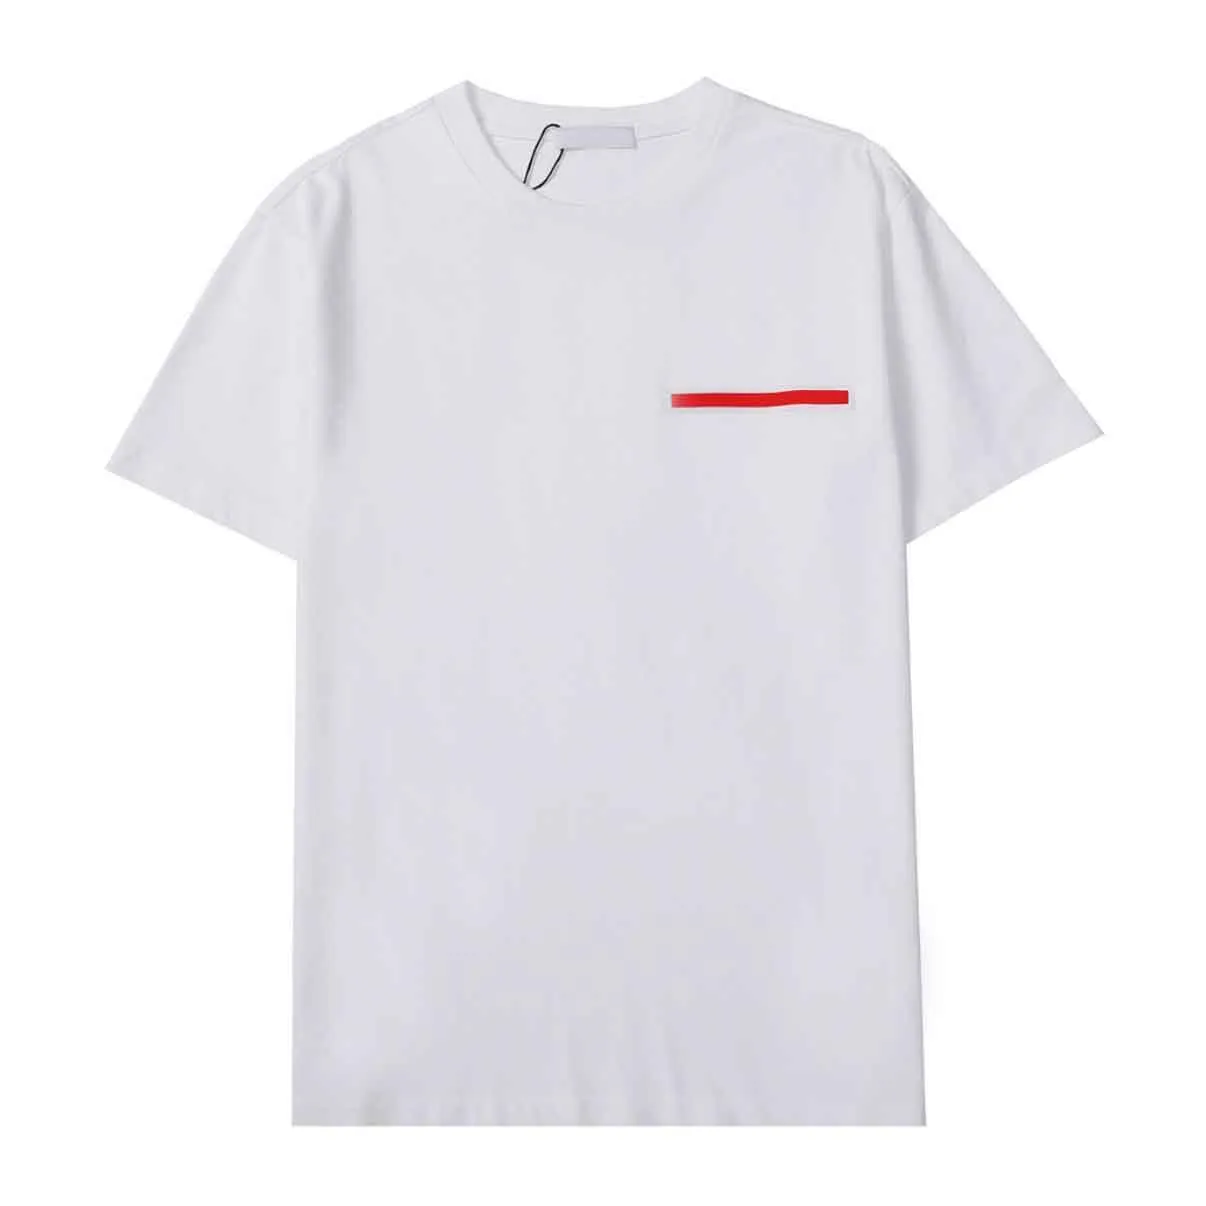 Men's T-Shirts Round neck embroidered and printed polar style summer wear with street pure cotton 2w2